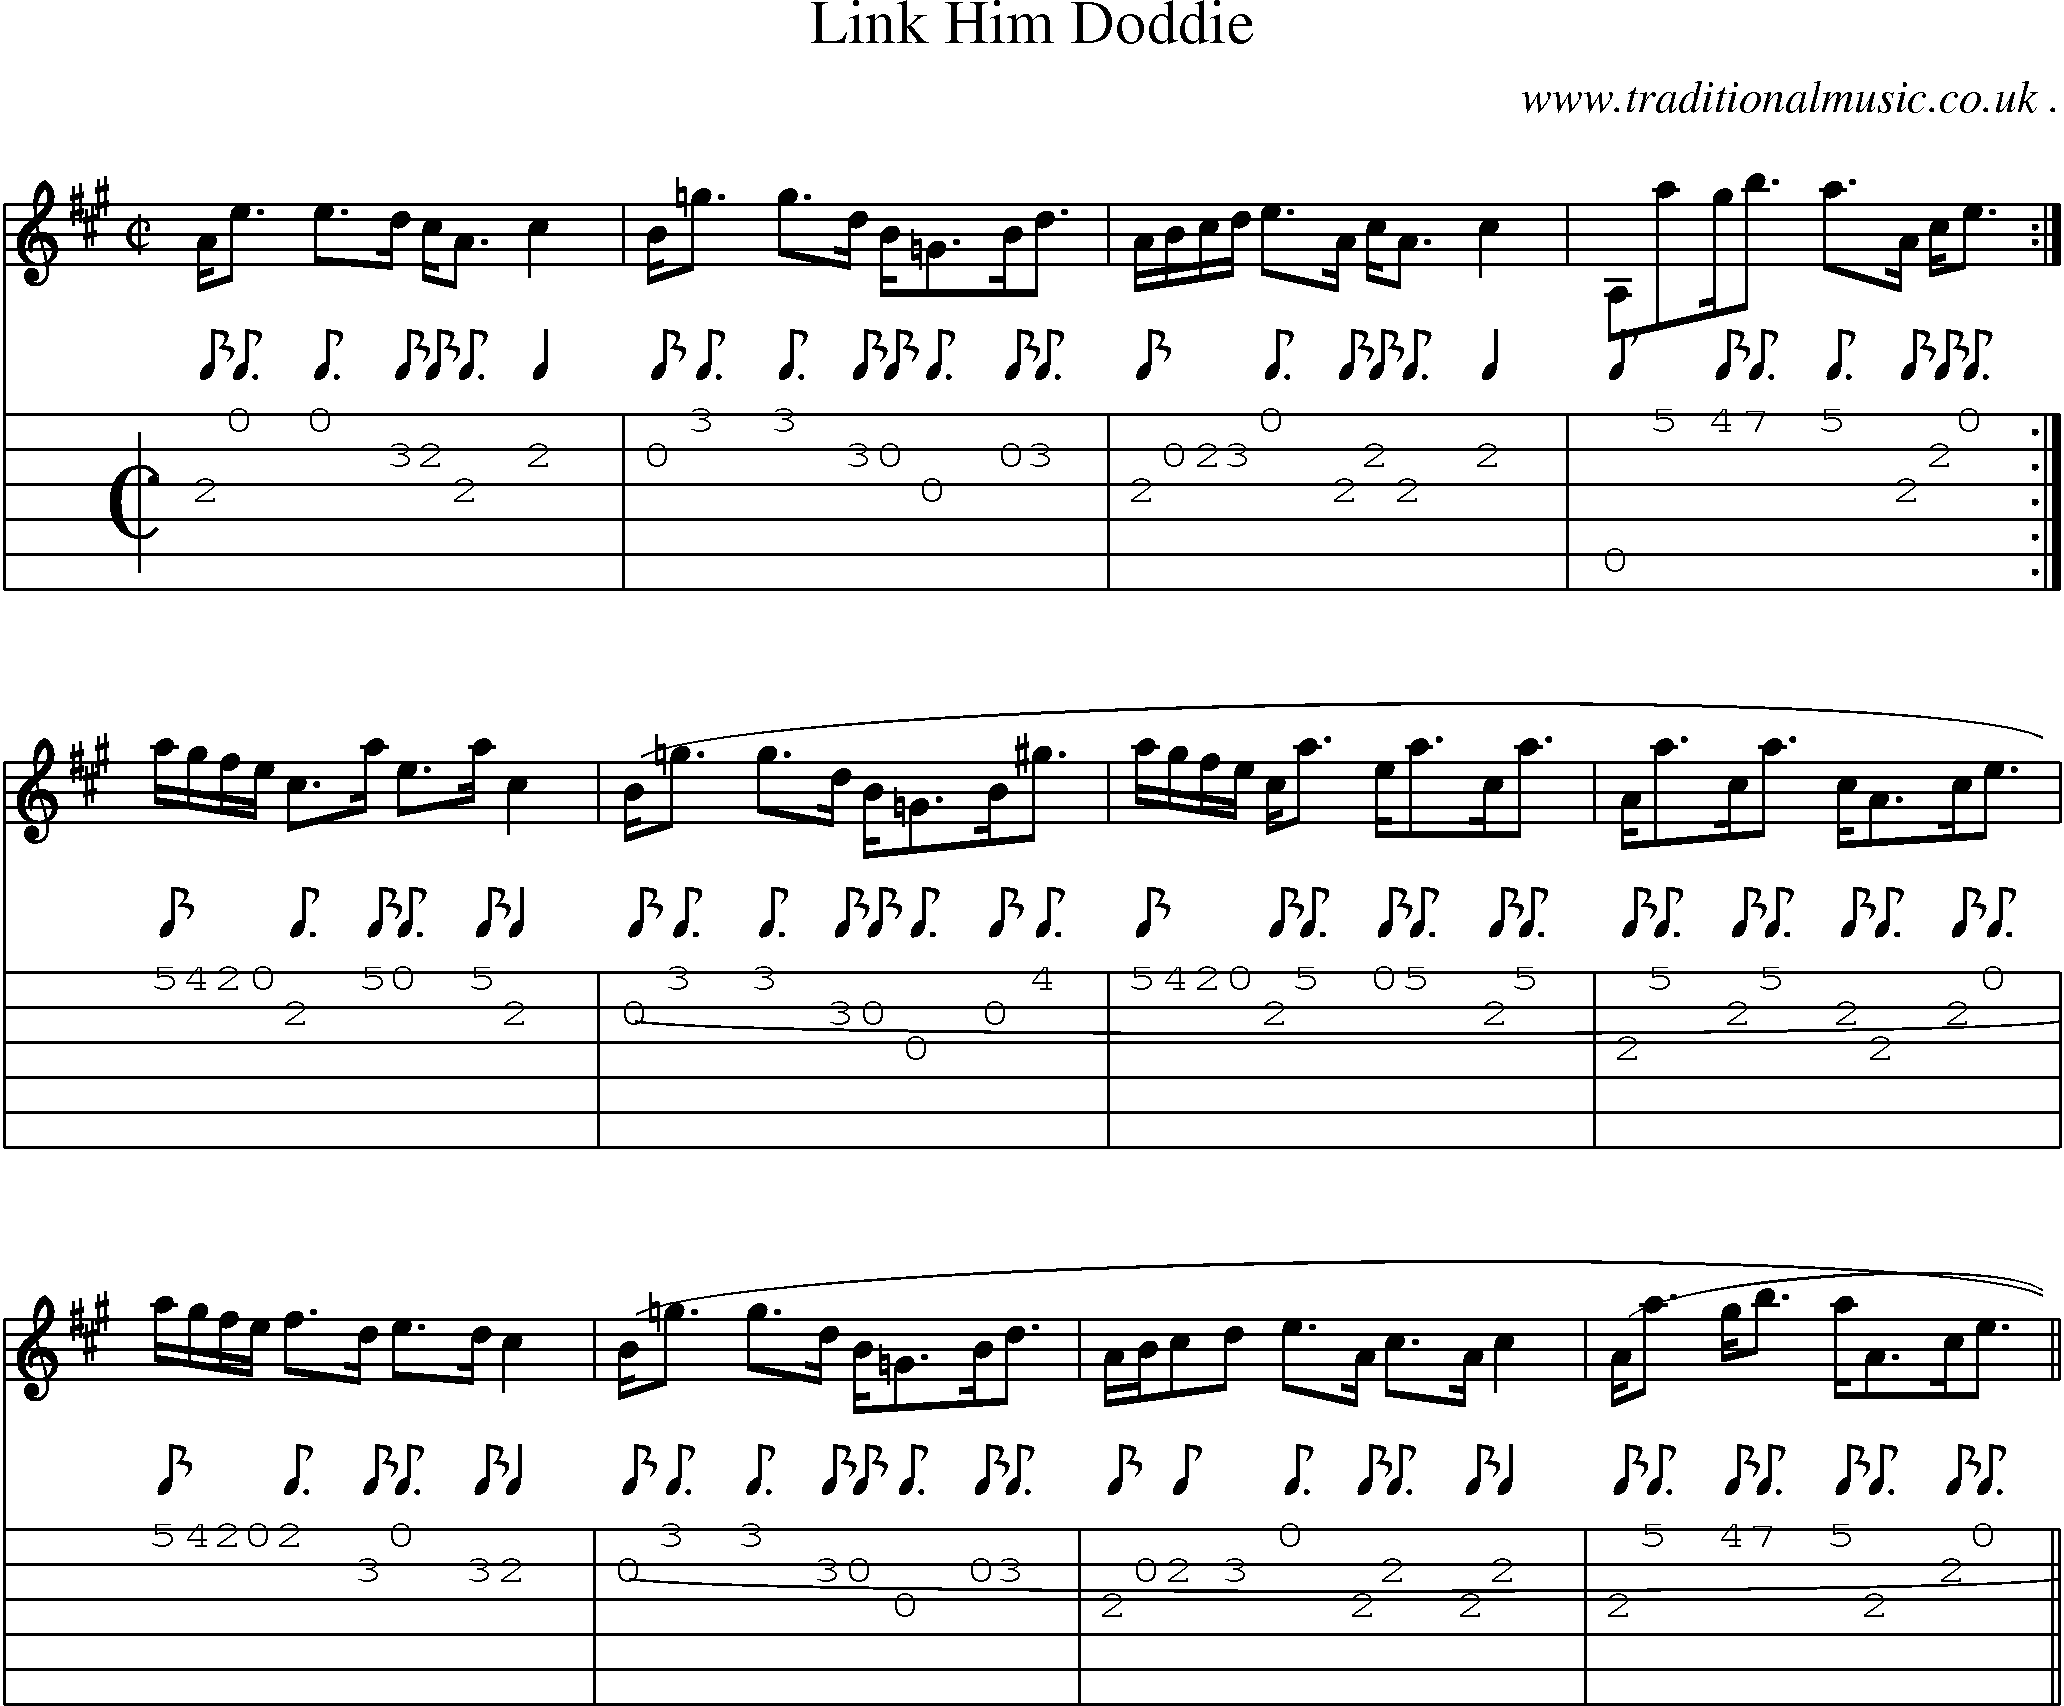 Sheet-music  score, Chords and Guitar Tabs for Link Him Doddie